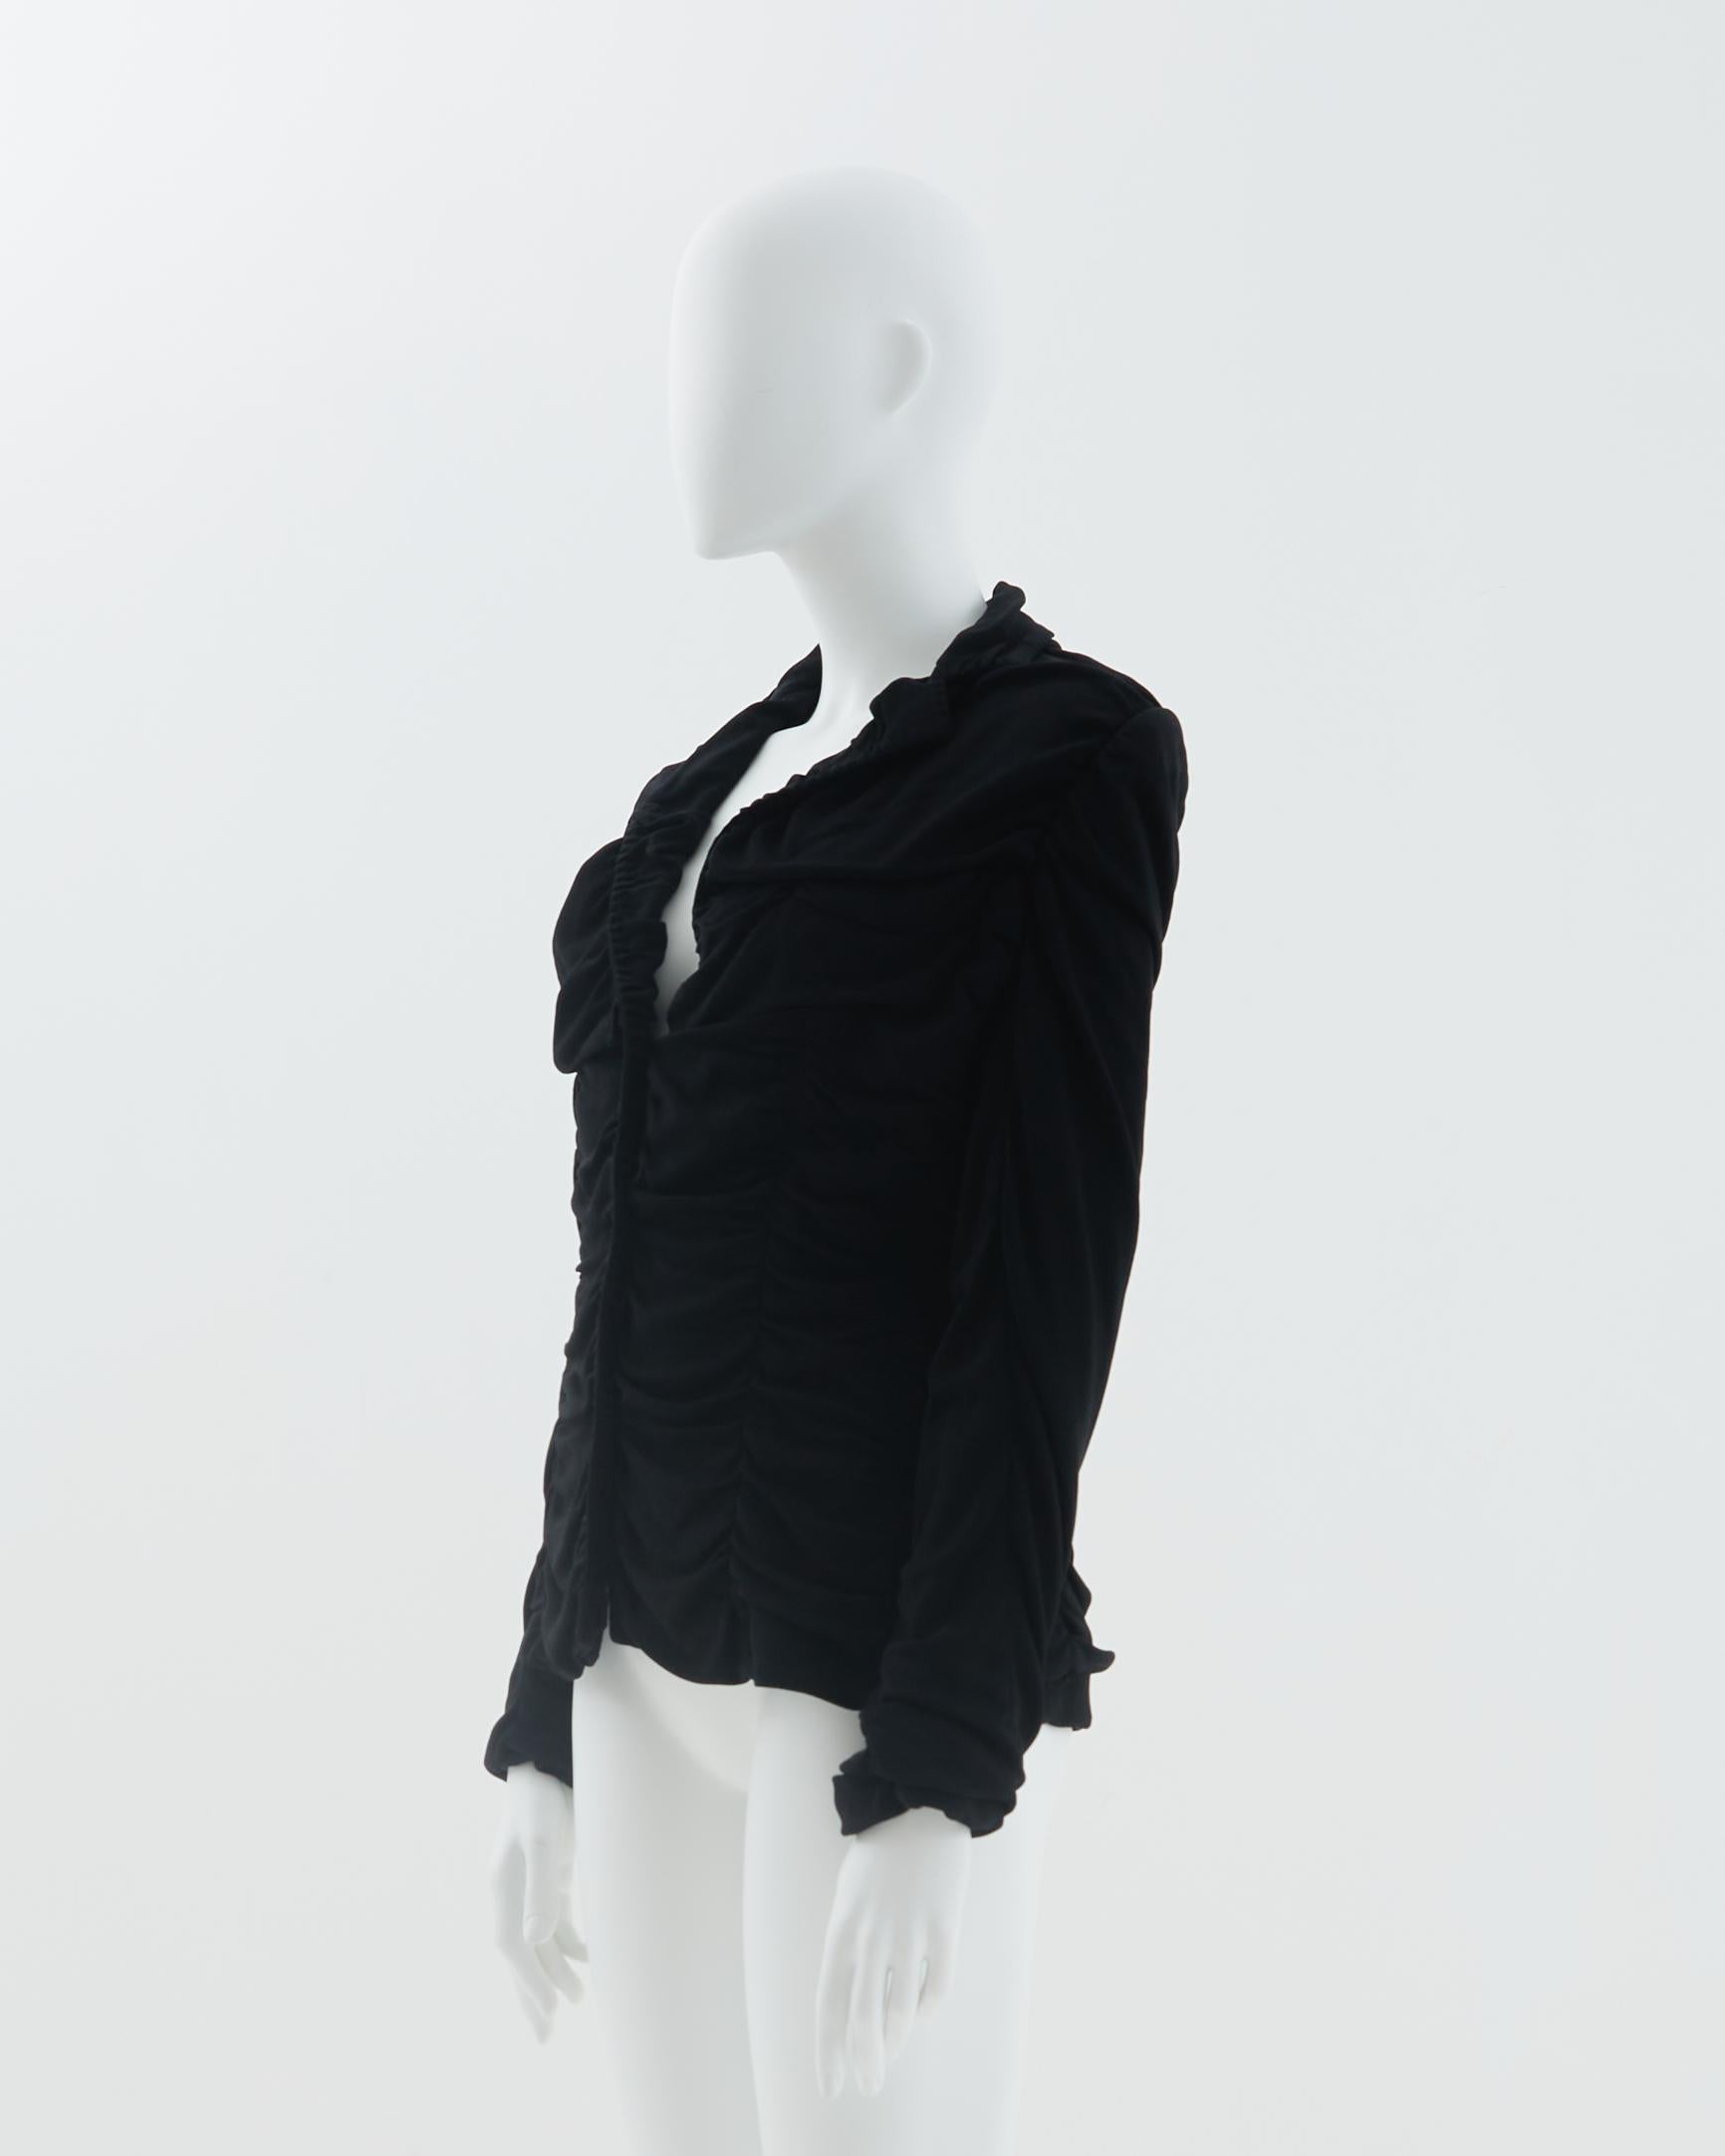 - Black ruched blazer 
- Sold by Skof.Archive
- Single breasted 
- Fully lined 
- Fitted to the body 
- Button closure 
- Spring Summer 2003 
- Made in Italy 

Composition
75% Viscose 
17% Nylon 
8% Elastane 

Size
FR 38 - EN 42 - UK 10 - US 8